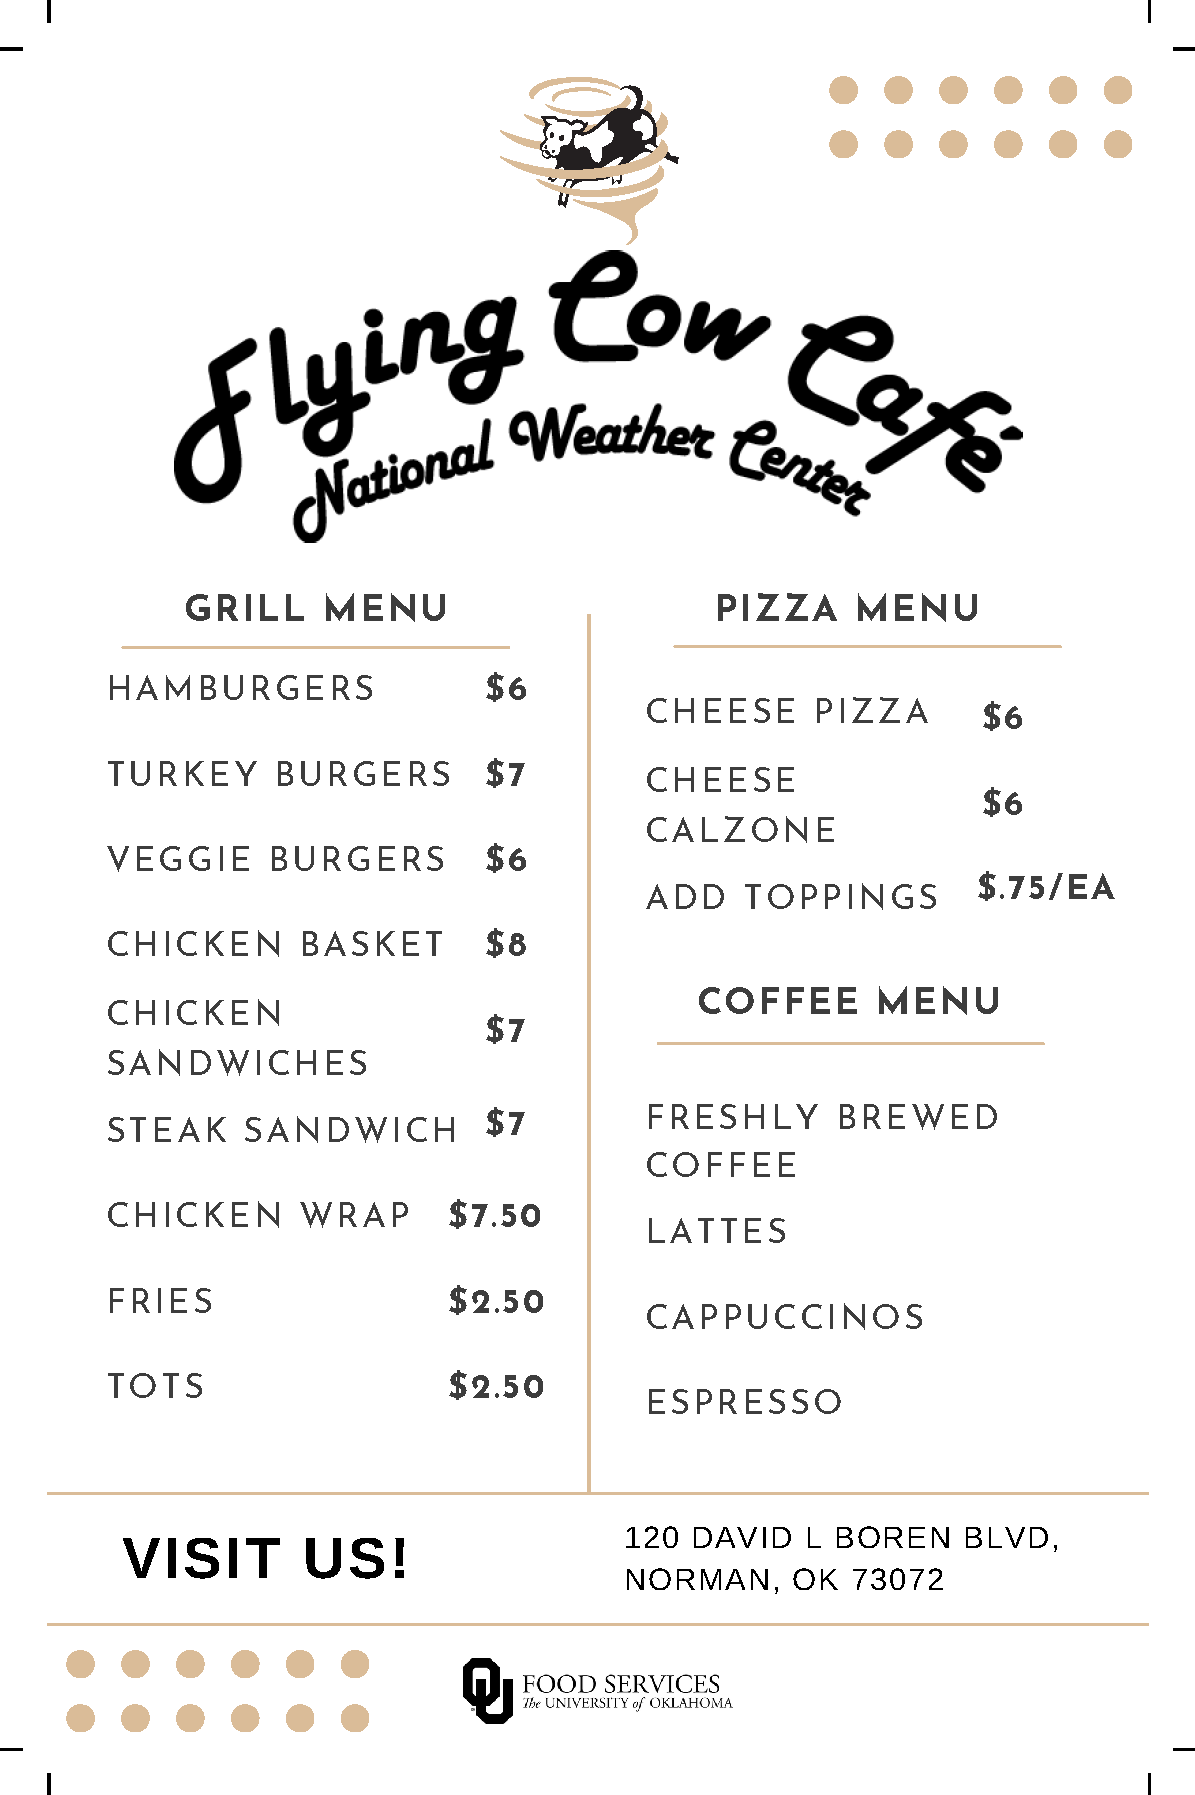 The Flying Cow Cafe – NWF Menu page 1